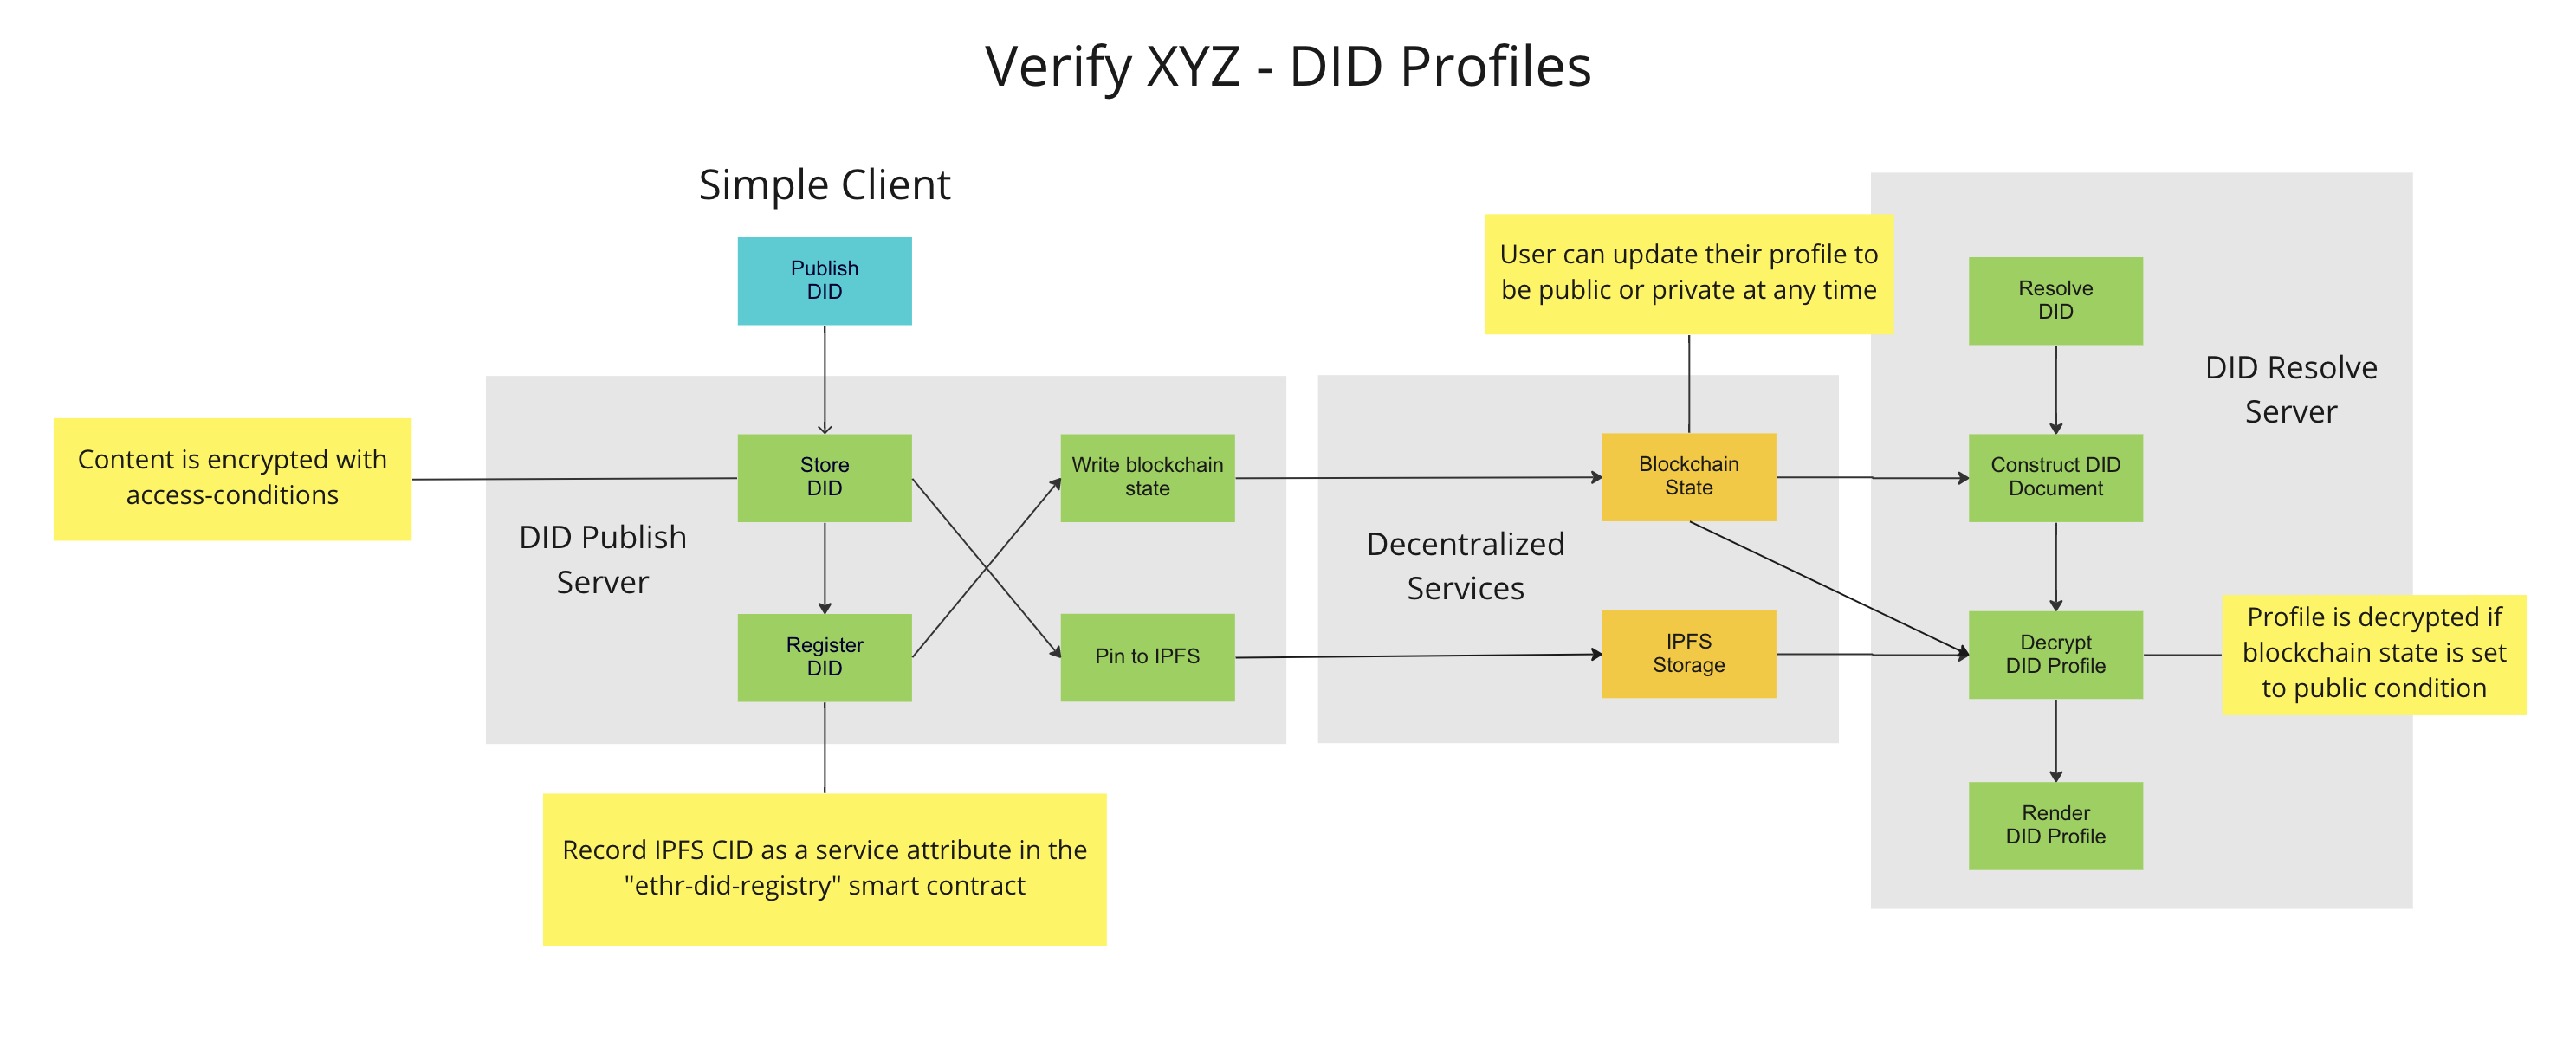 https://raw.githubusercontent.com/verify-xyz/did-profiles/main/assets/schematic.png